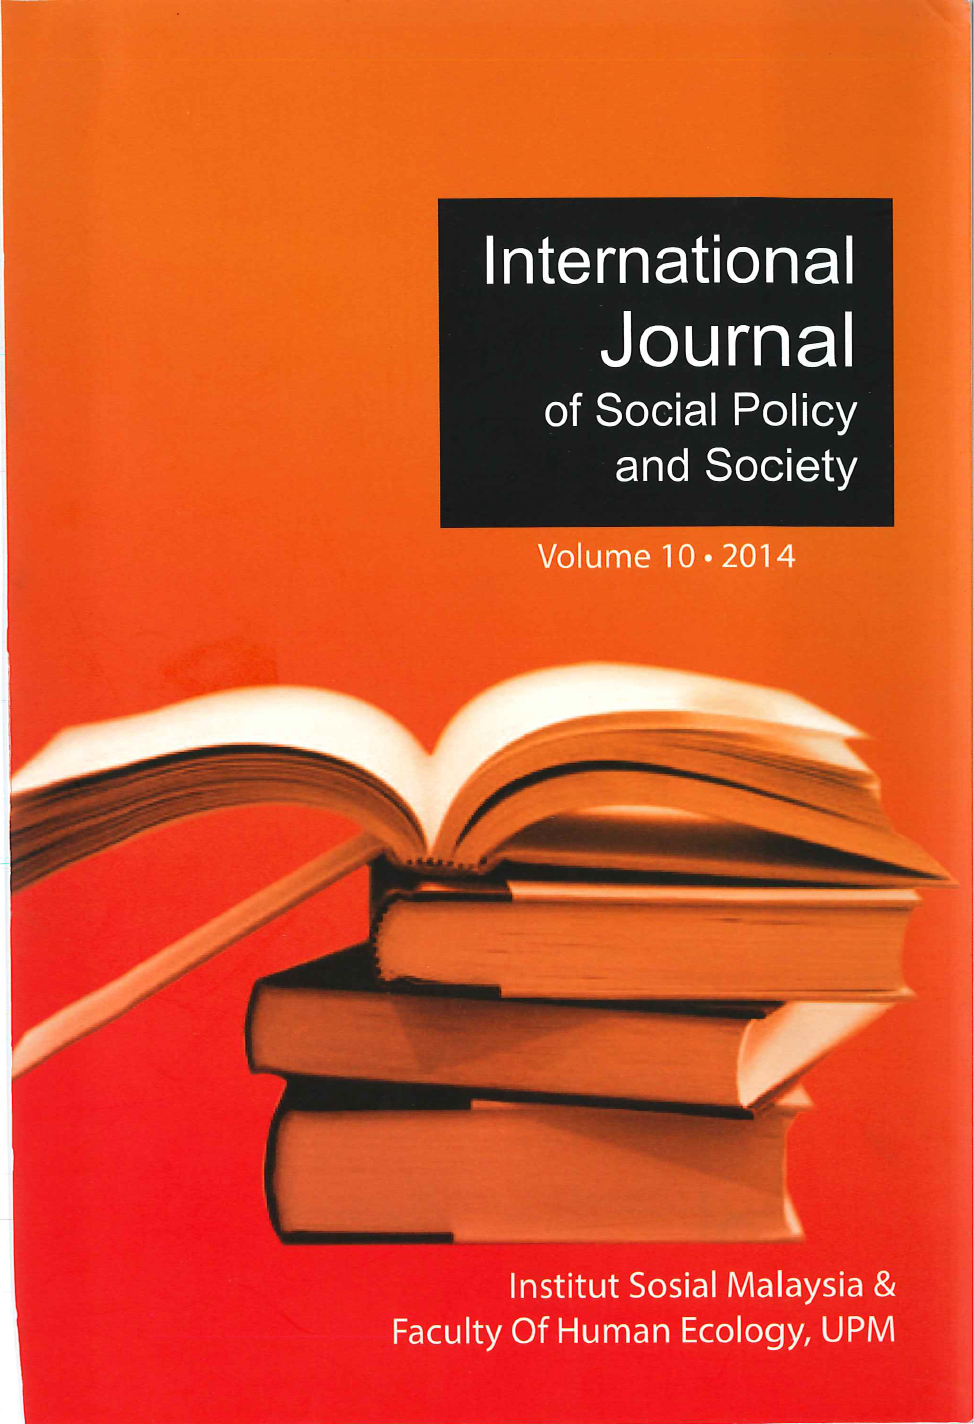 					View Vol. 10 (2014): International Journal of Social Policy and Society Volume 10 2014
				